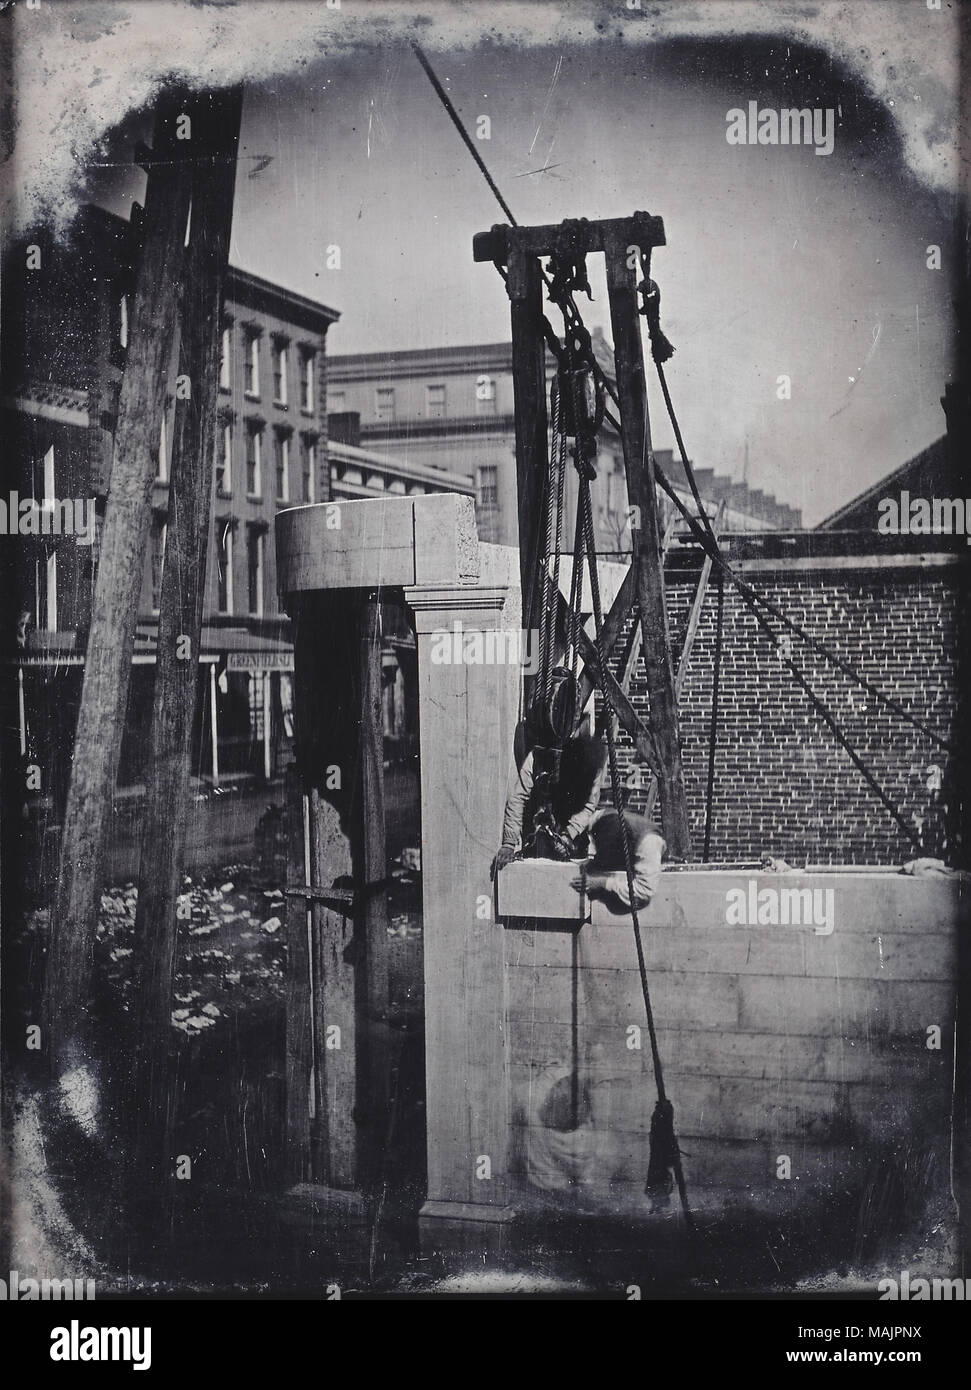 View of the northeast corner of Fourth and Olive Streets of the construction of a marble building. Two workmen use a hoist to fit a block into the wall. Commercial buildings can be seen in the background, as well as stone rubble in the street. Title: Construction of Marble Building, Northeast Corner of Fourth and Olive Streets, Workmen with Hoist fitting Block into Wall.  . 1850. Thomas M. Easterly Stock Photo